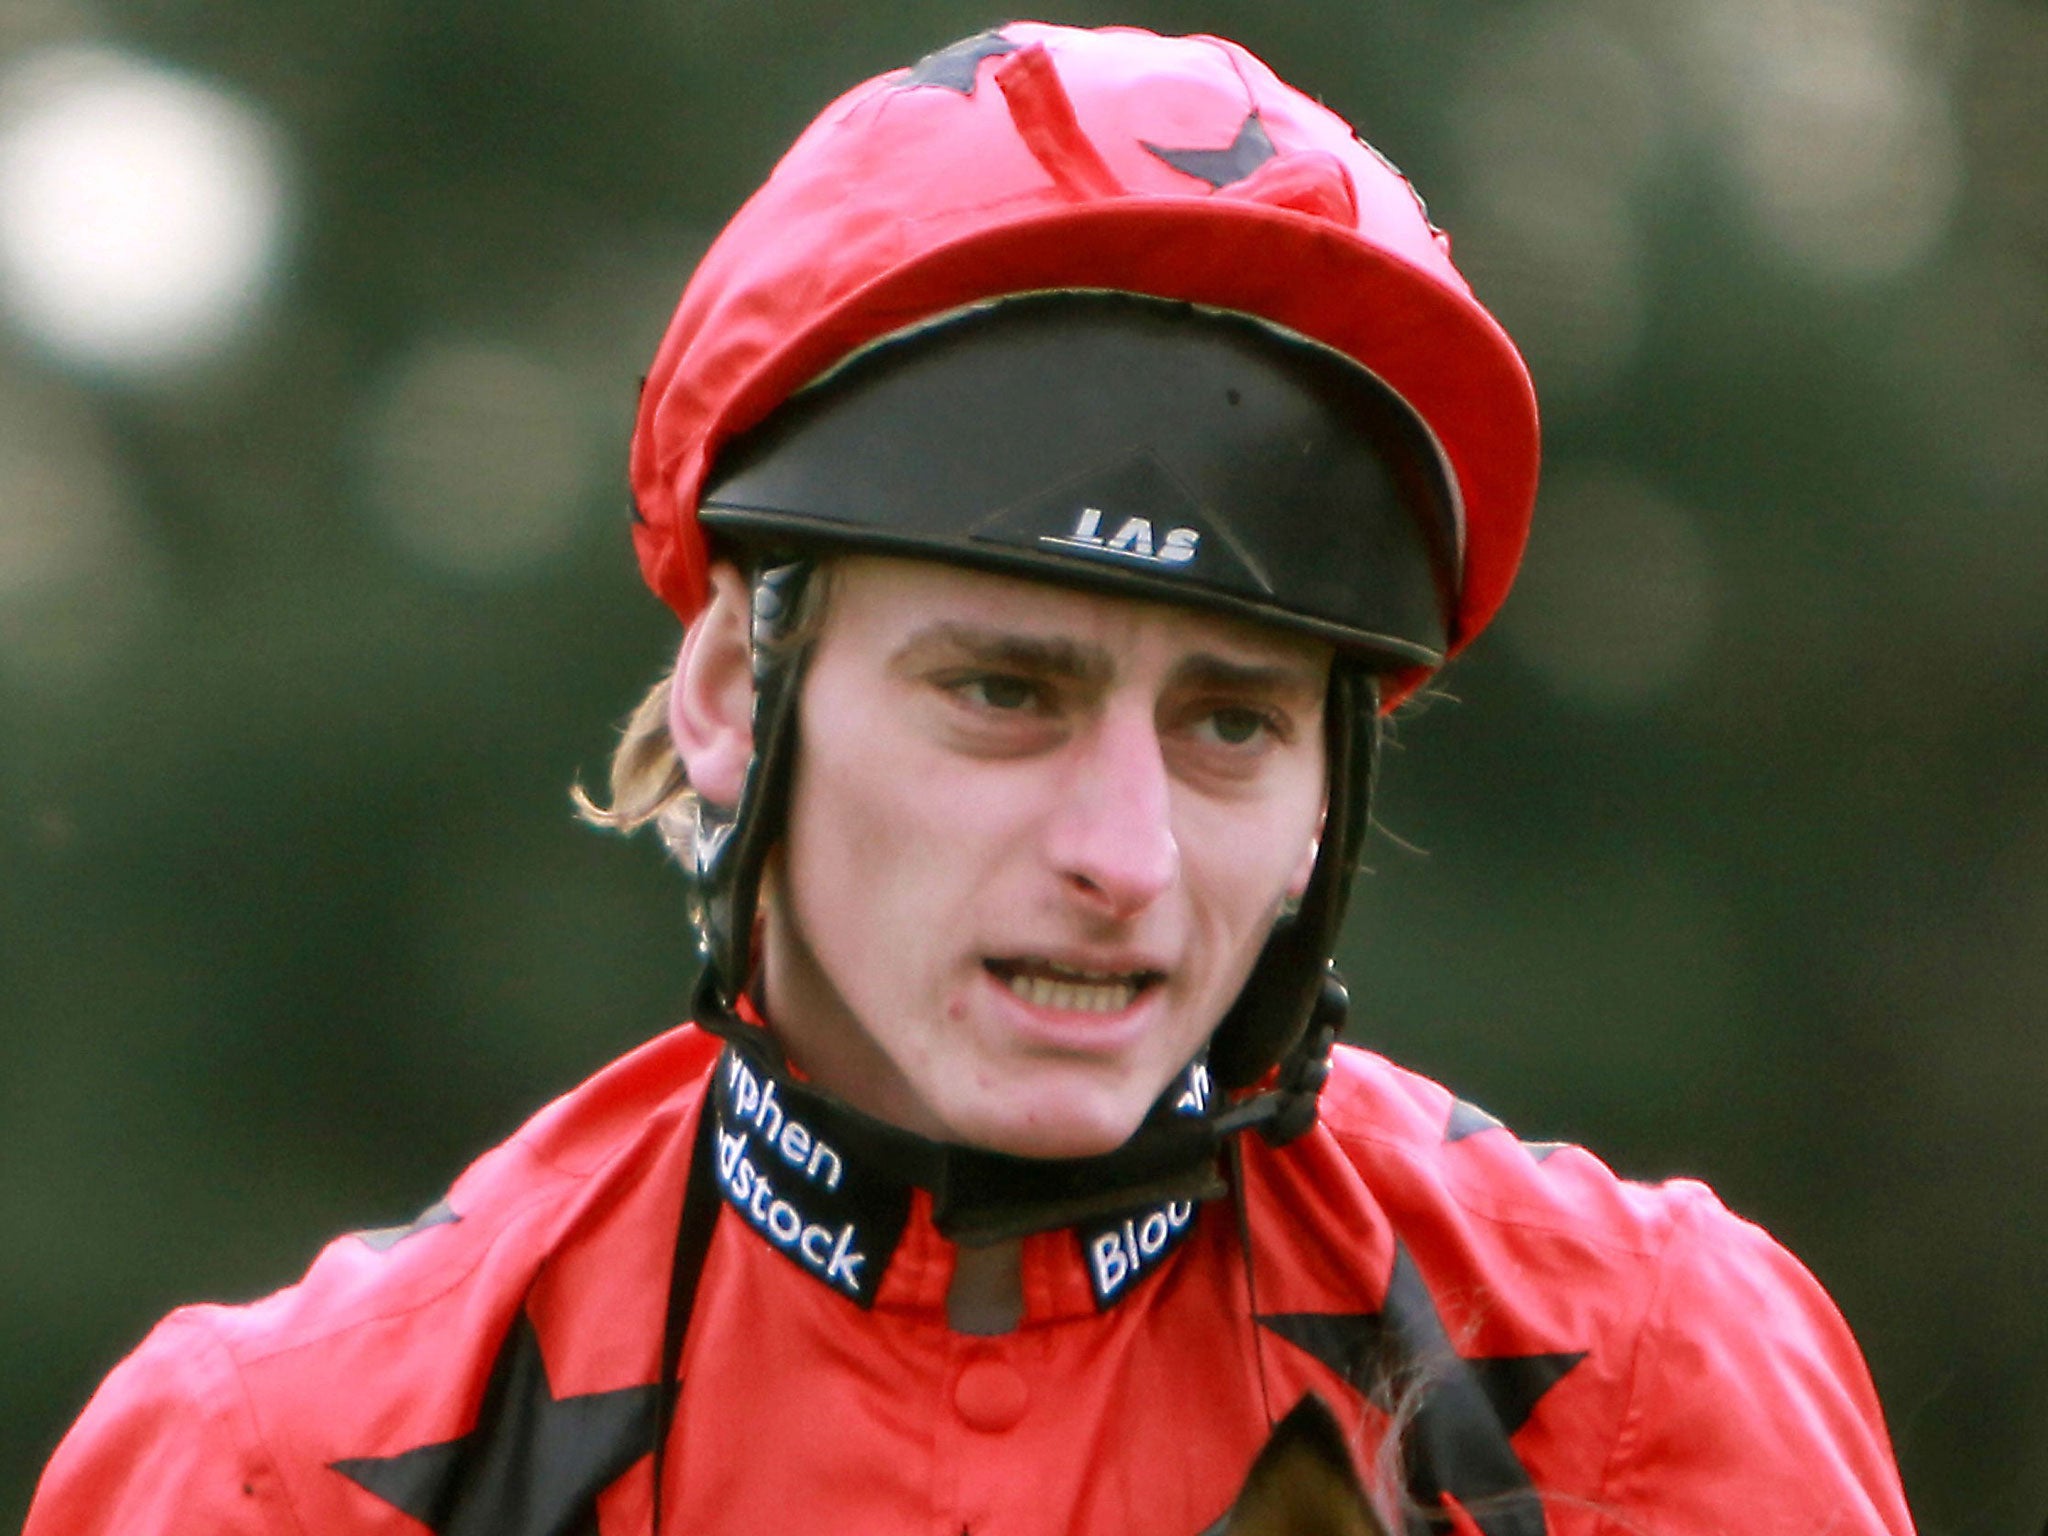 Adam Kirby received a seven-day ban for his ride on Pipers Piping